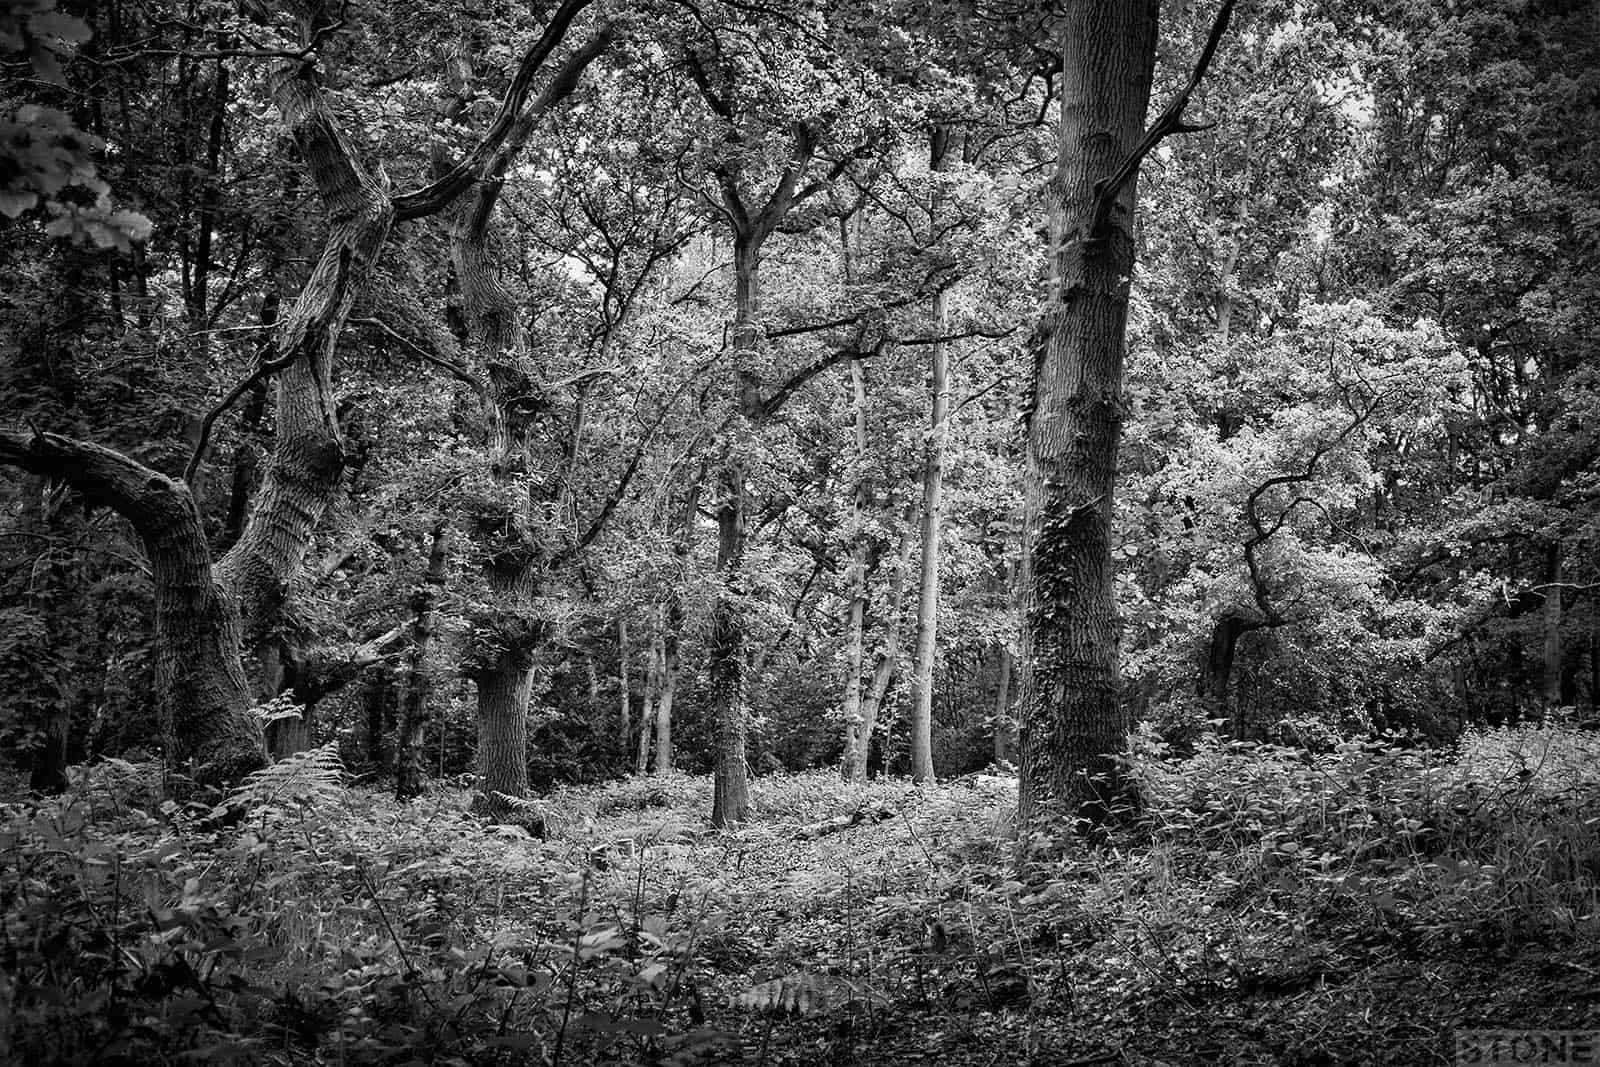 Mousehold 2726 © NS 2016 William of Norwich